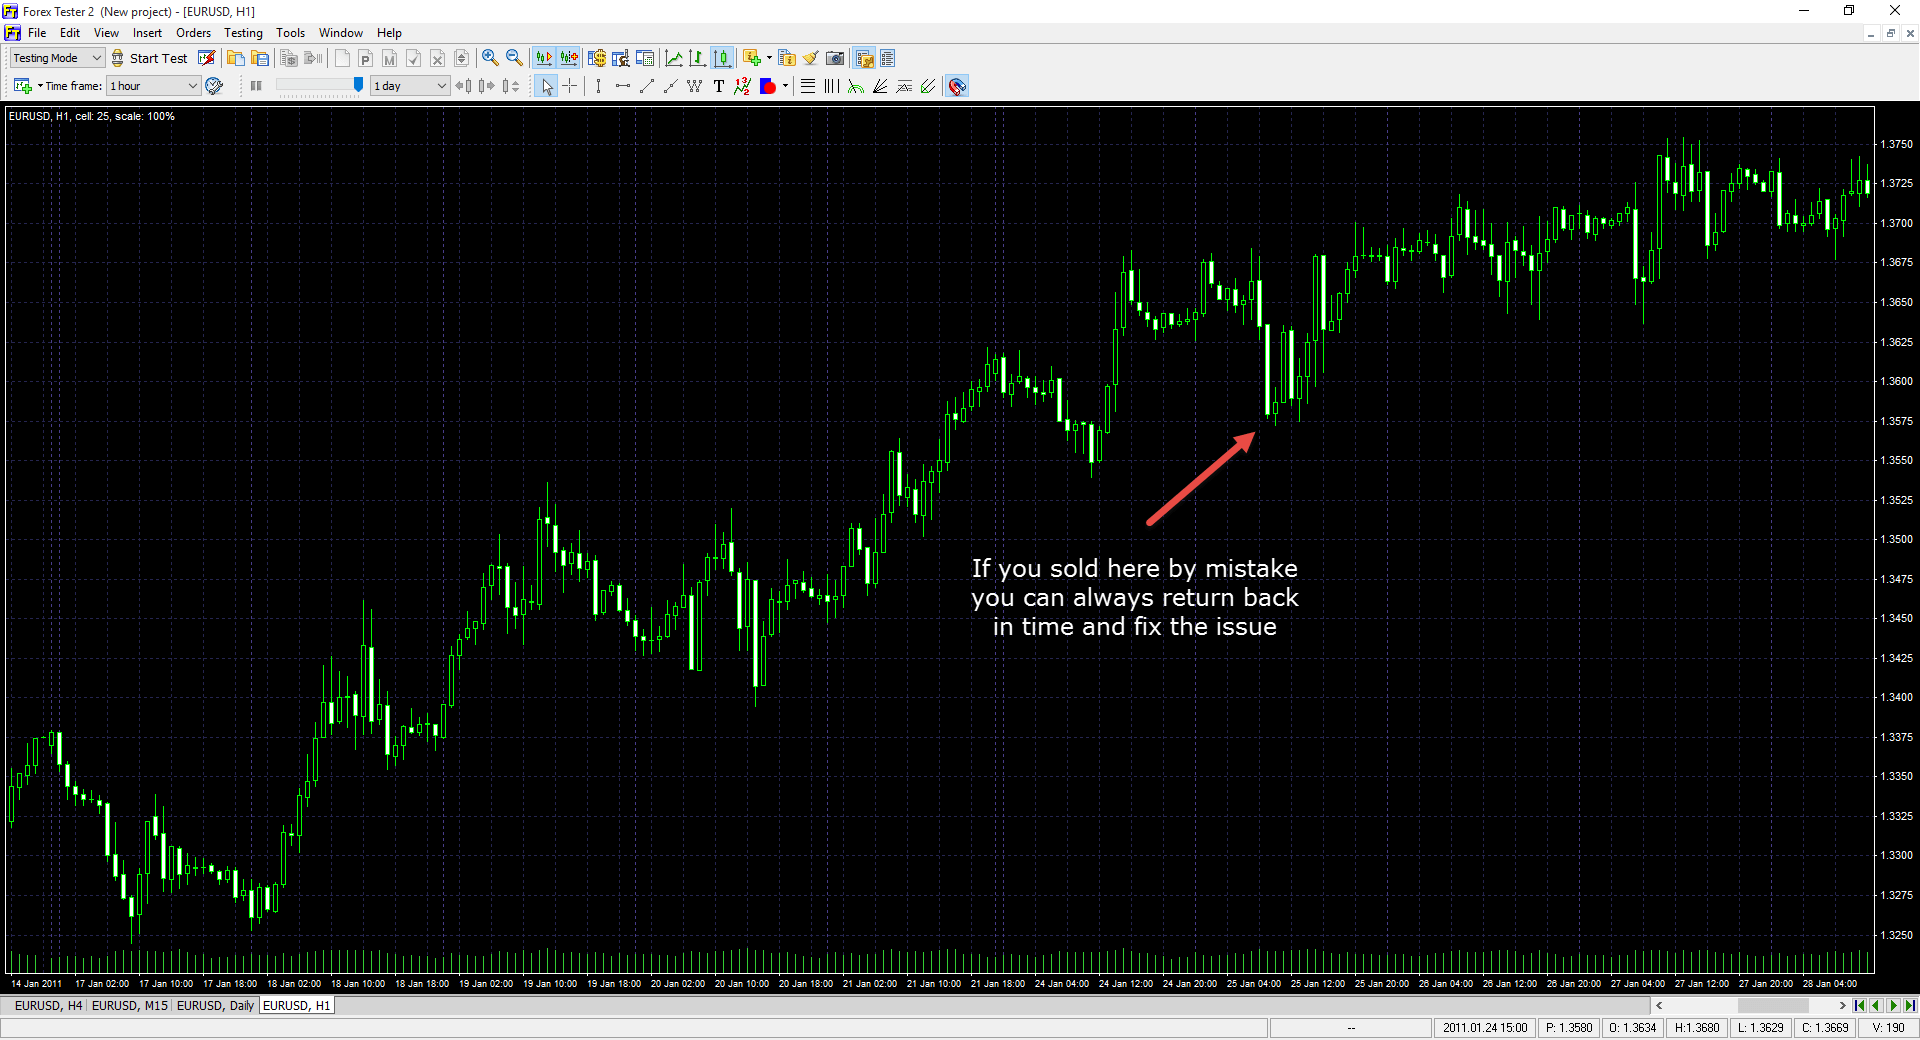 Correct mistakes of trading when backtest manual trading strategies